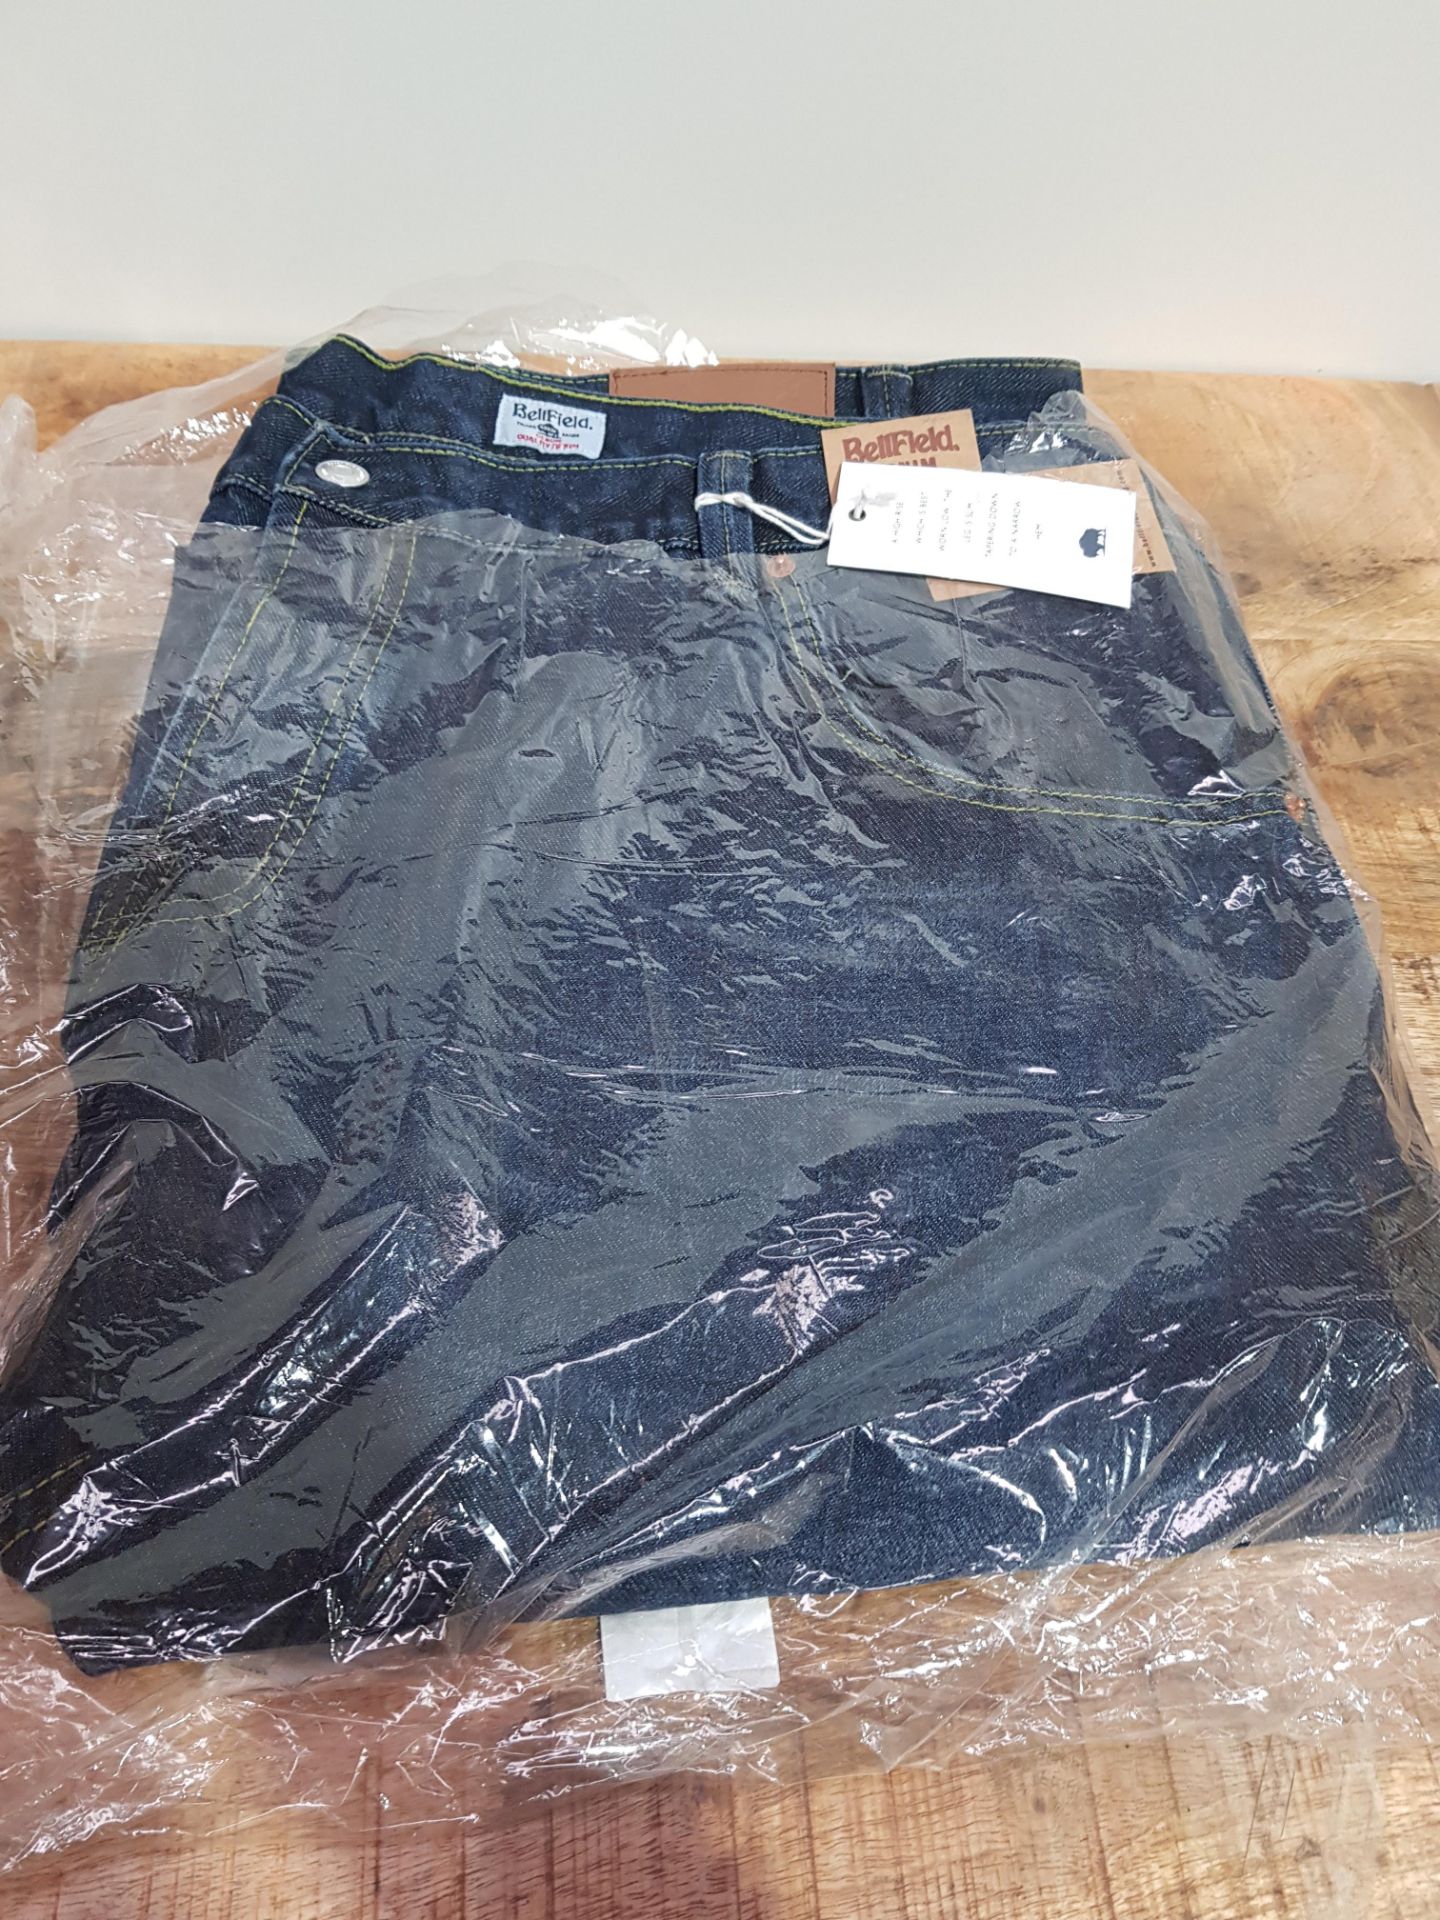 BRAND NEW BELLFIELD JEANS SIZE 50S (KS494)Condition ReportBRAND NEW